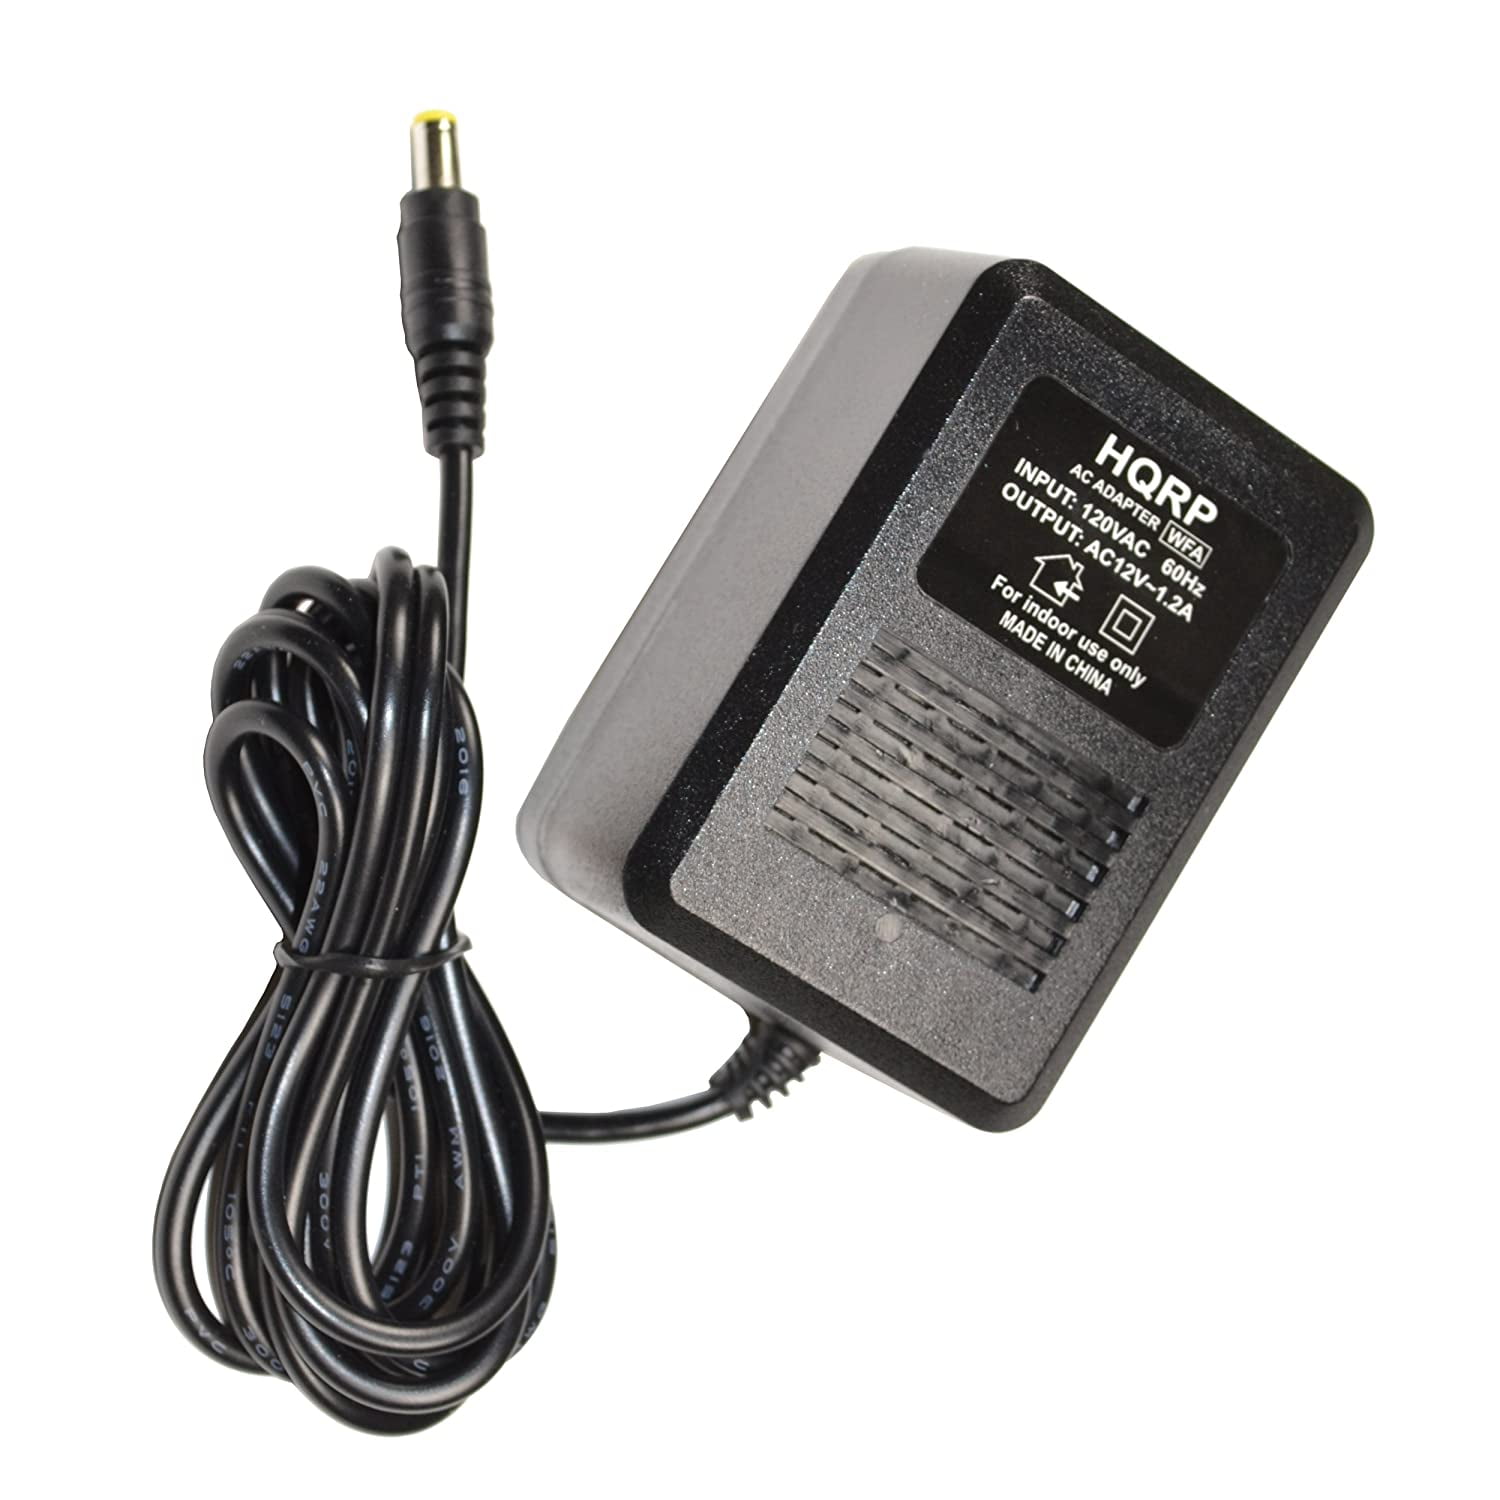 HQRP AC Adapter for Black & Decker 90560923 fits CHV1510 15.6-Volt Type 1  Cyclonic Action